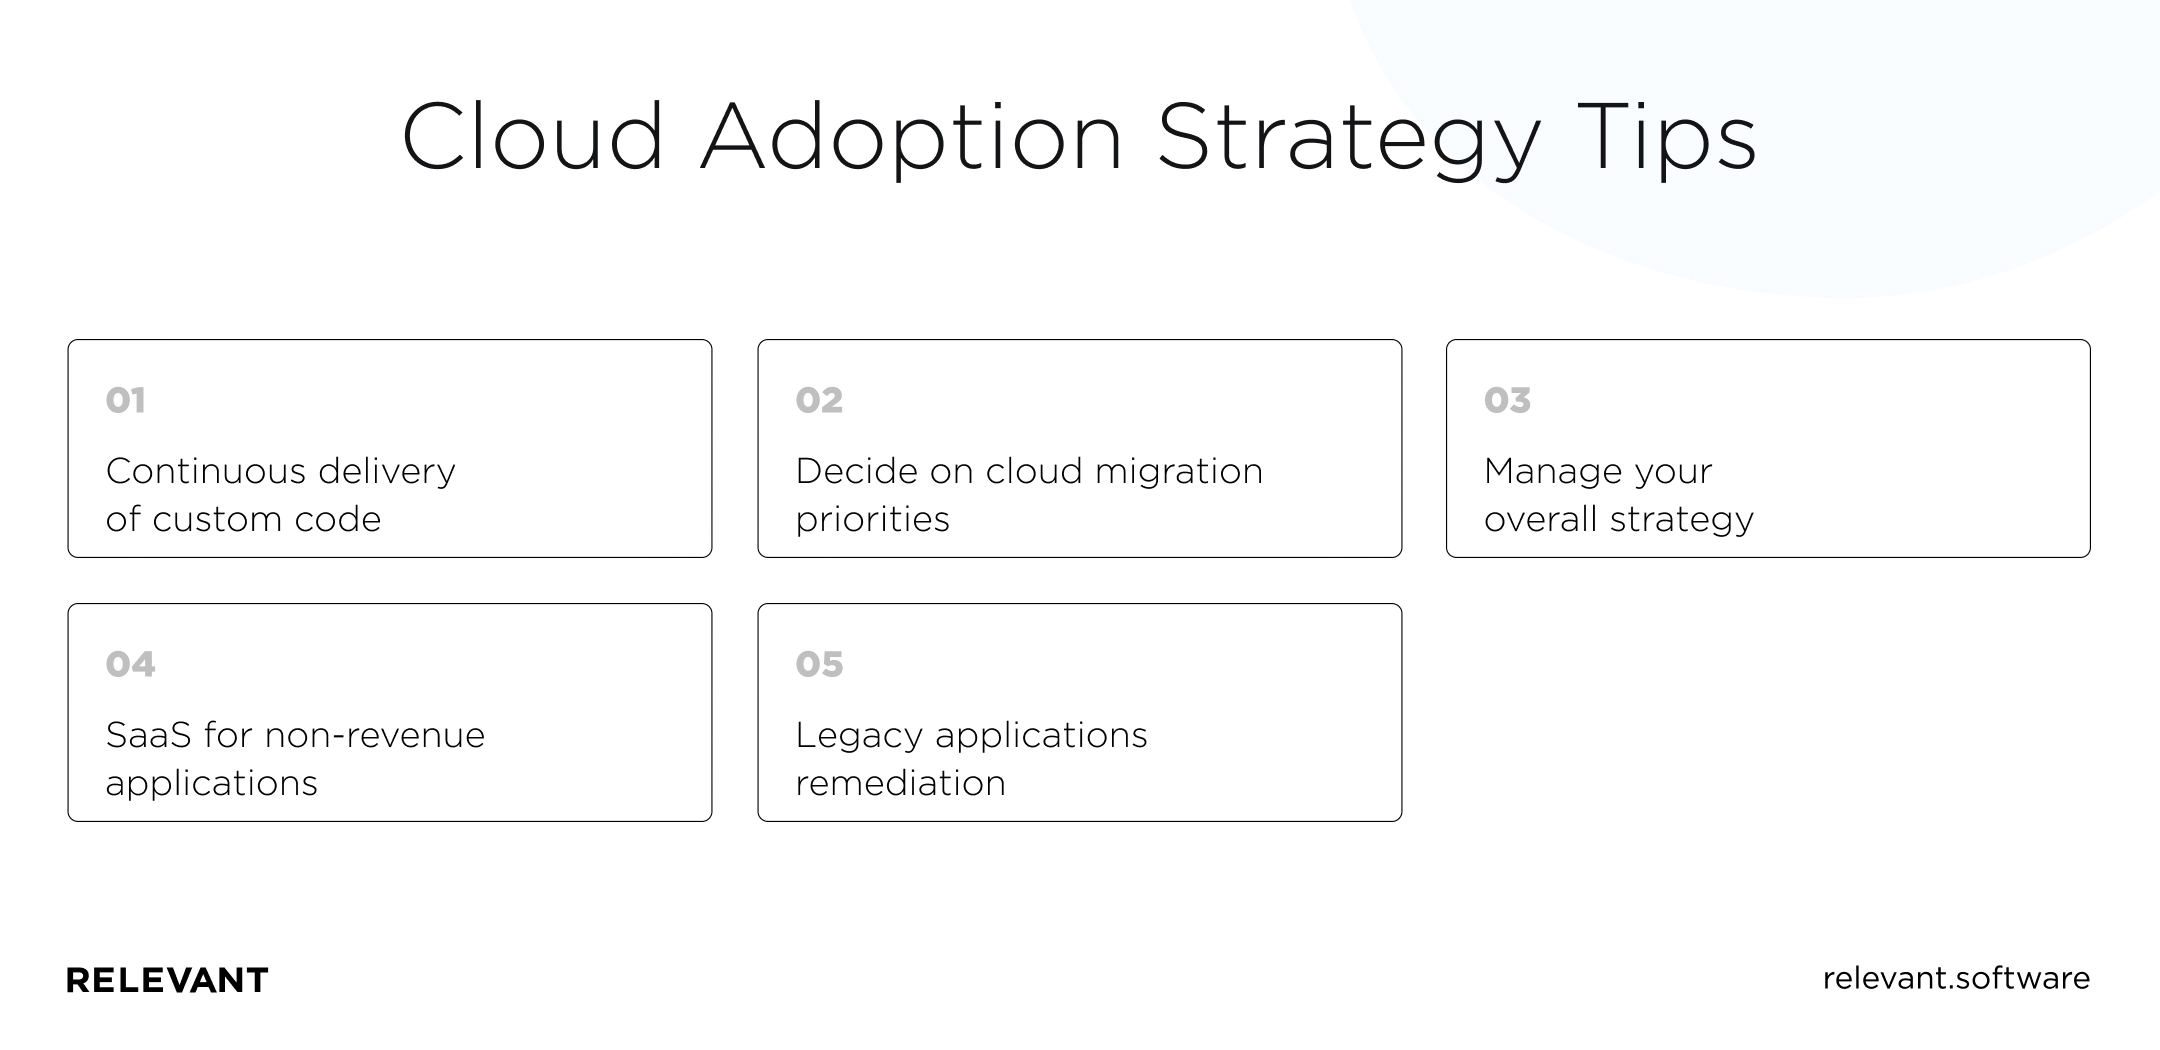 Cloud Adoption Strategy Tips